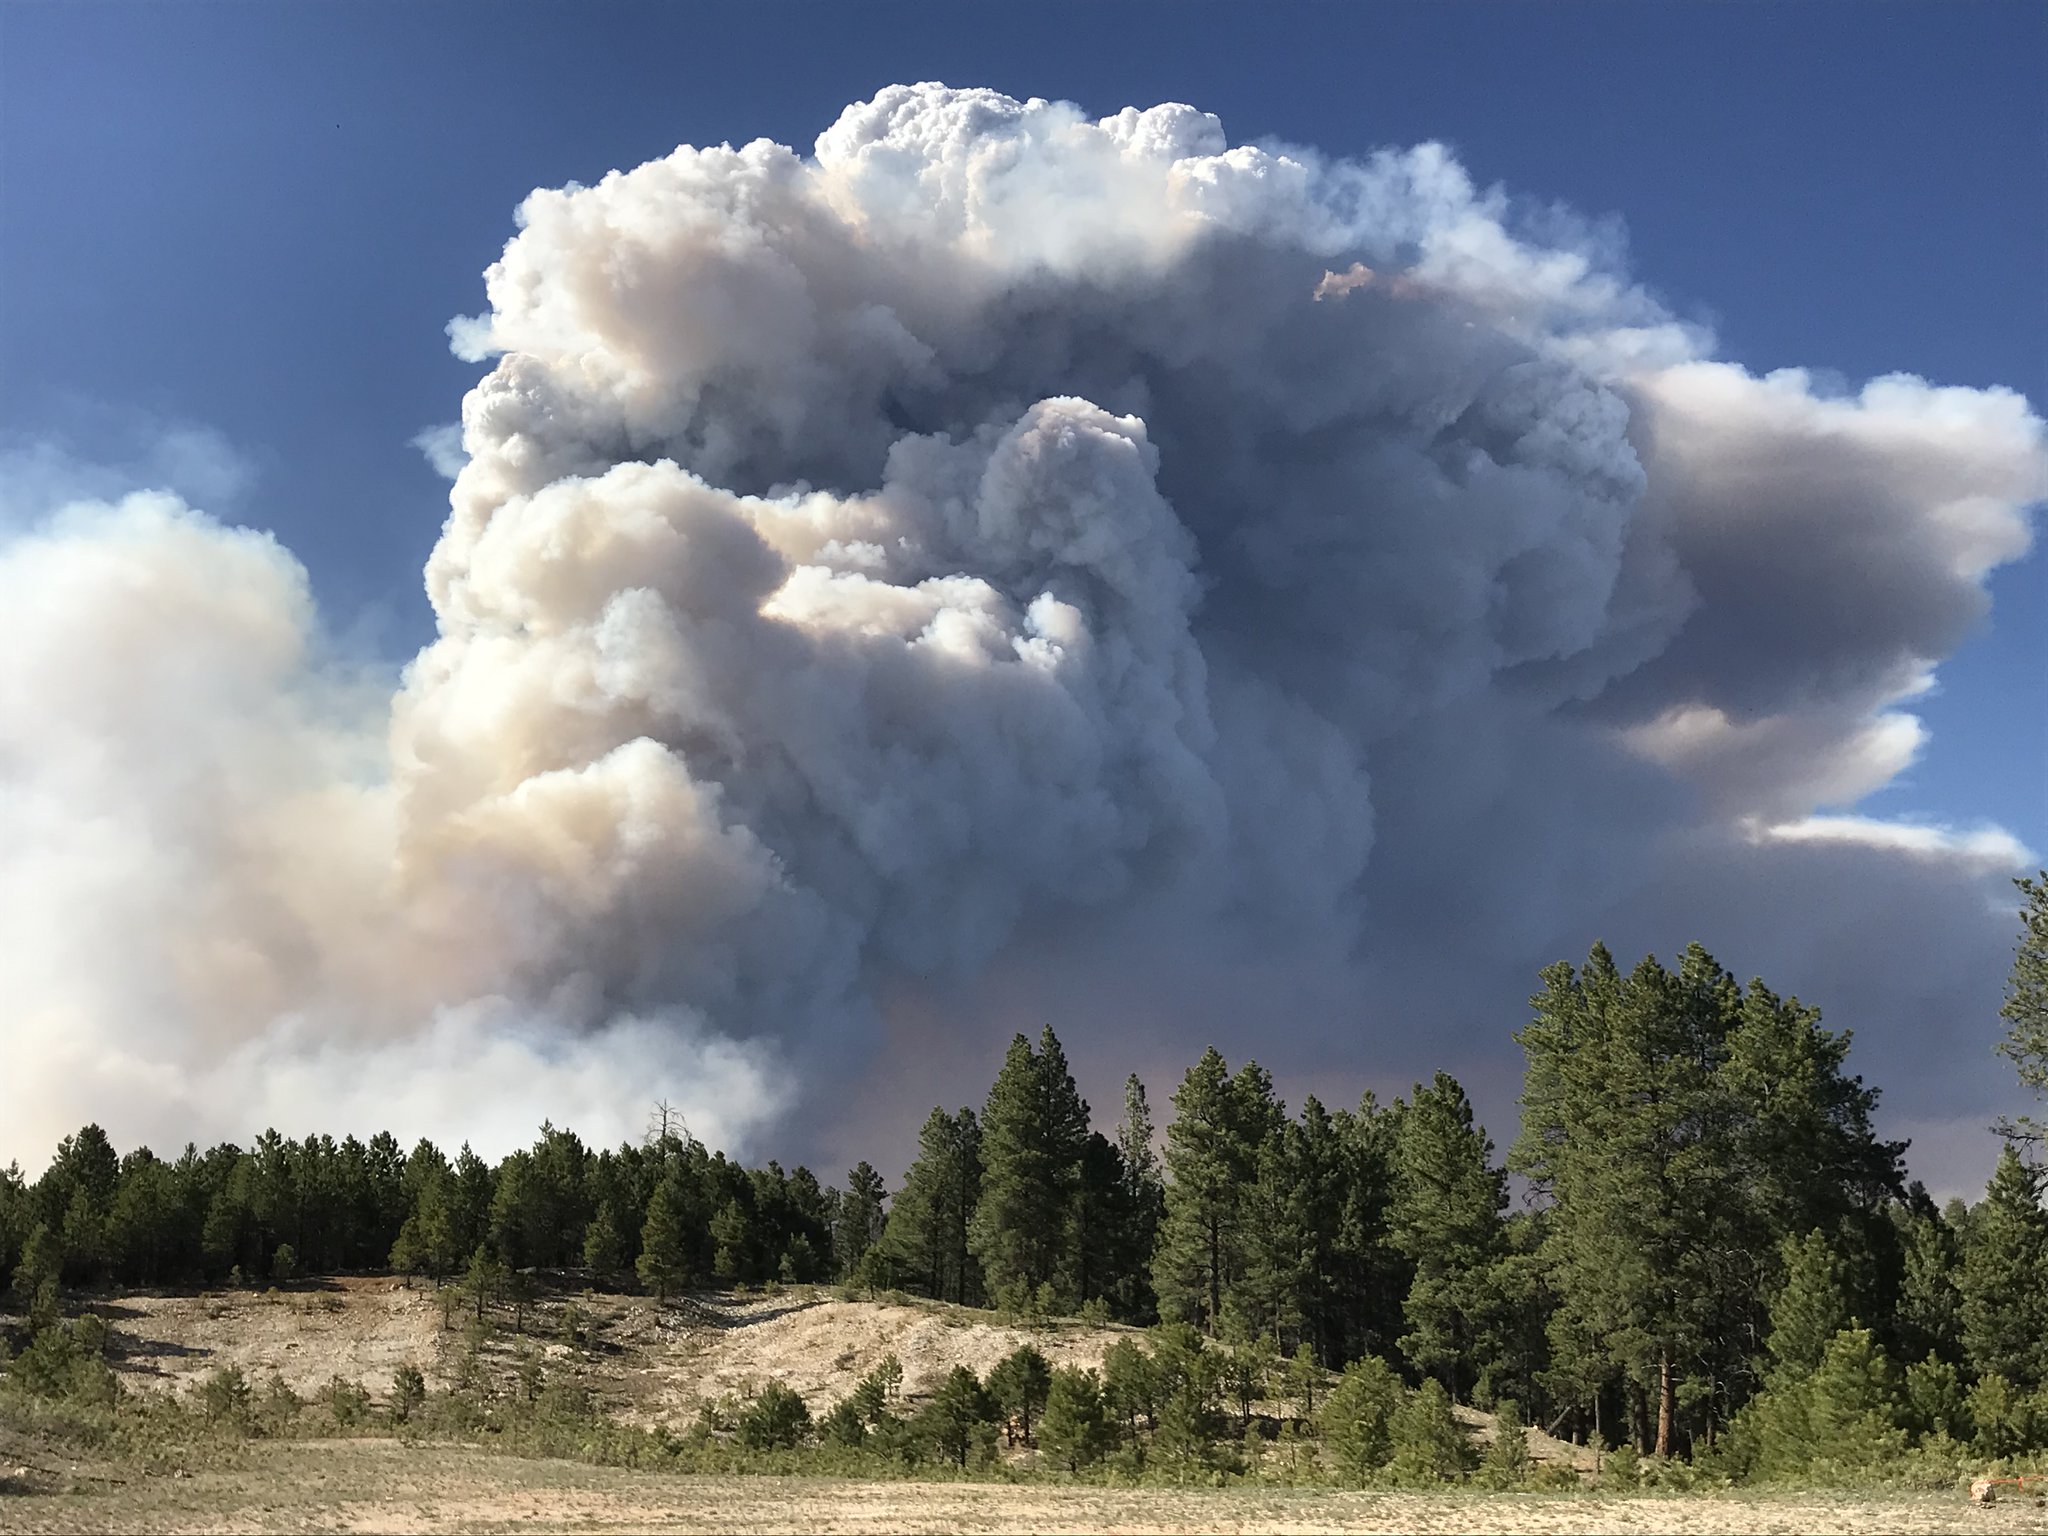 Extreme fire behavior on the Mangum Fire for June 12, 2020 produces large column of smoke. Photo Credit: Kaibab National Forest